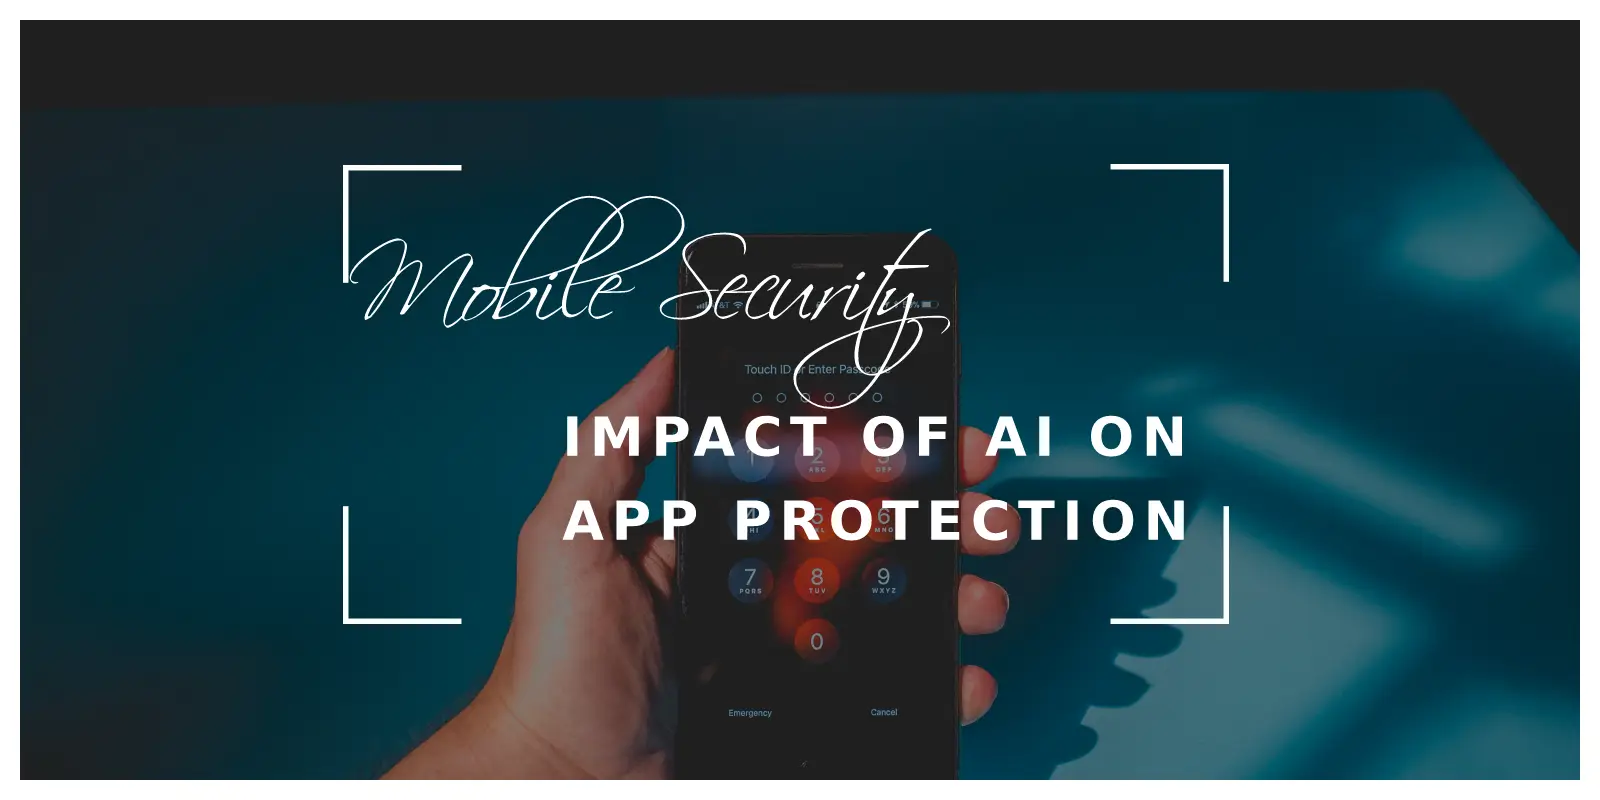 Enhancing Mobile Security: The Impact of AI on App Protection